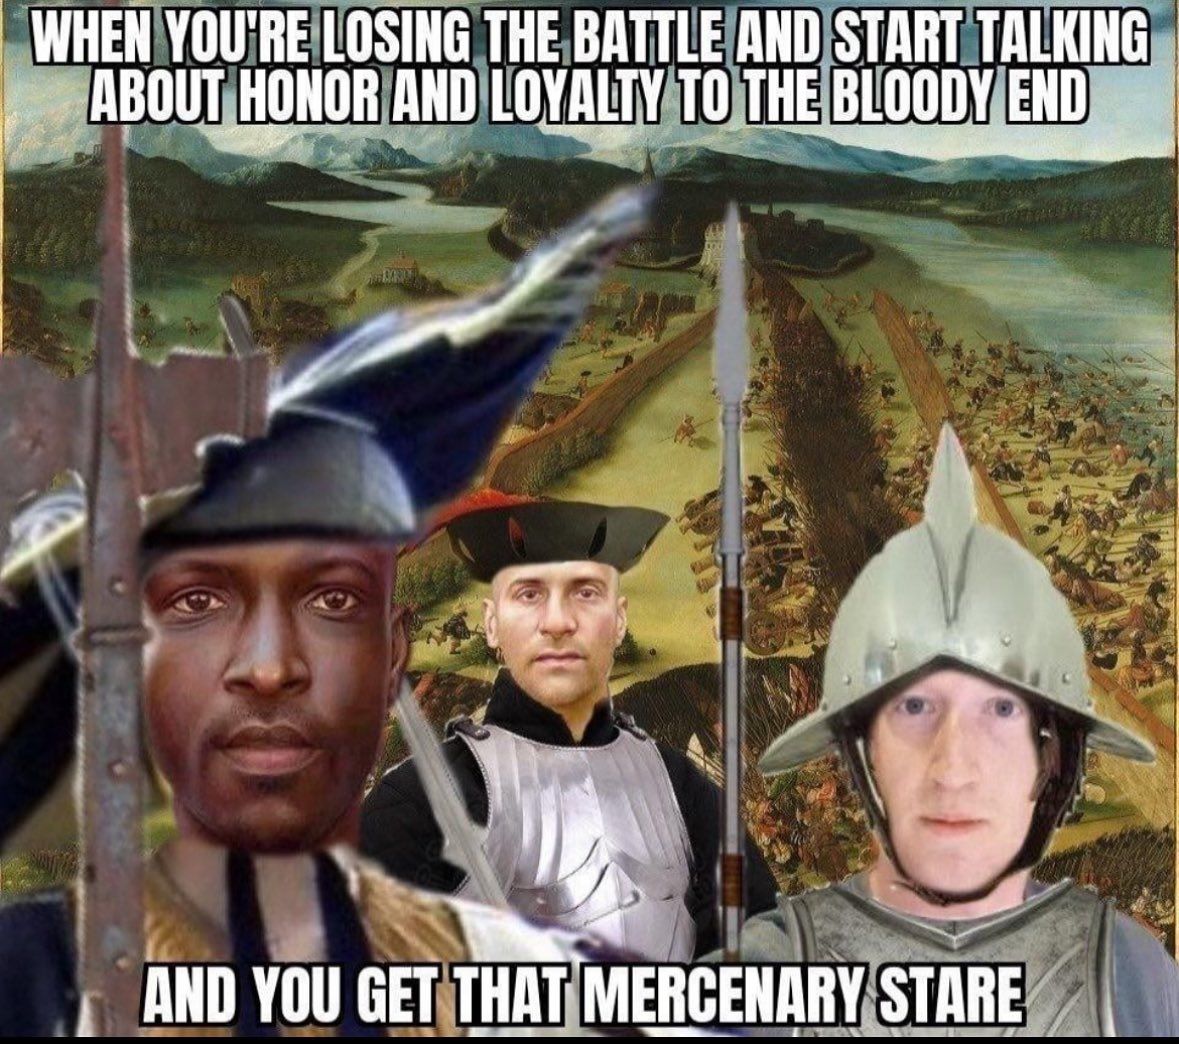 mah nigga we are going to plunder the supply wagons before bailing out